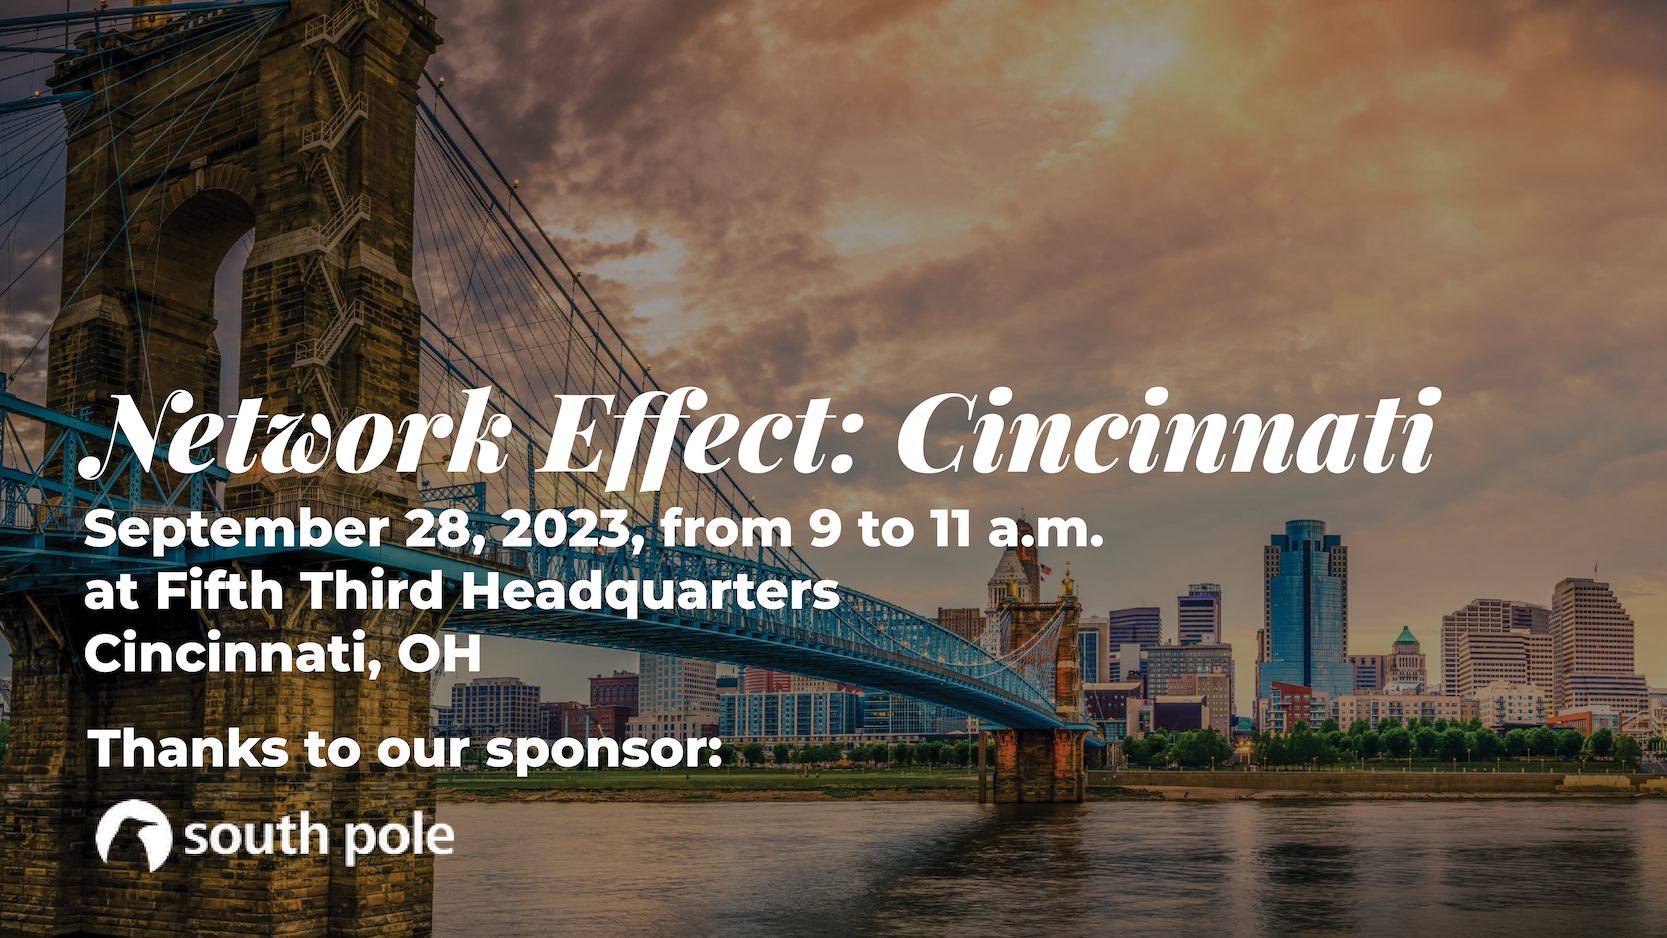 "Network Effect: CincinnatI" "September 28, 2023, from 9 to 11 a.m. at fifth third headquarters Cincinnati, OH. Thanks to our sponsor: South pole"